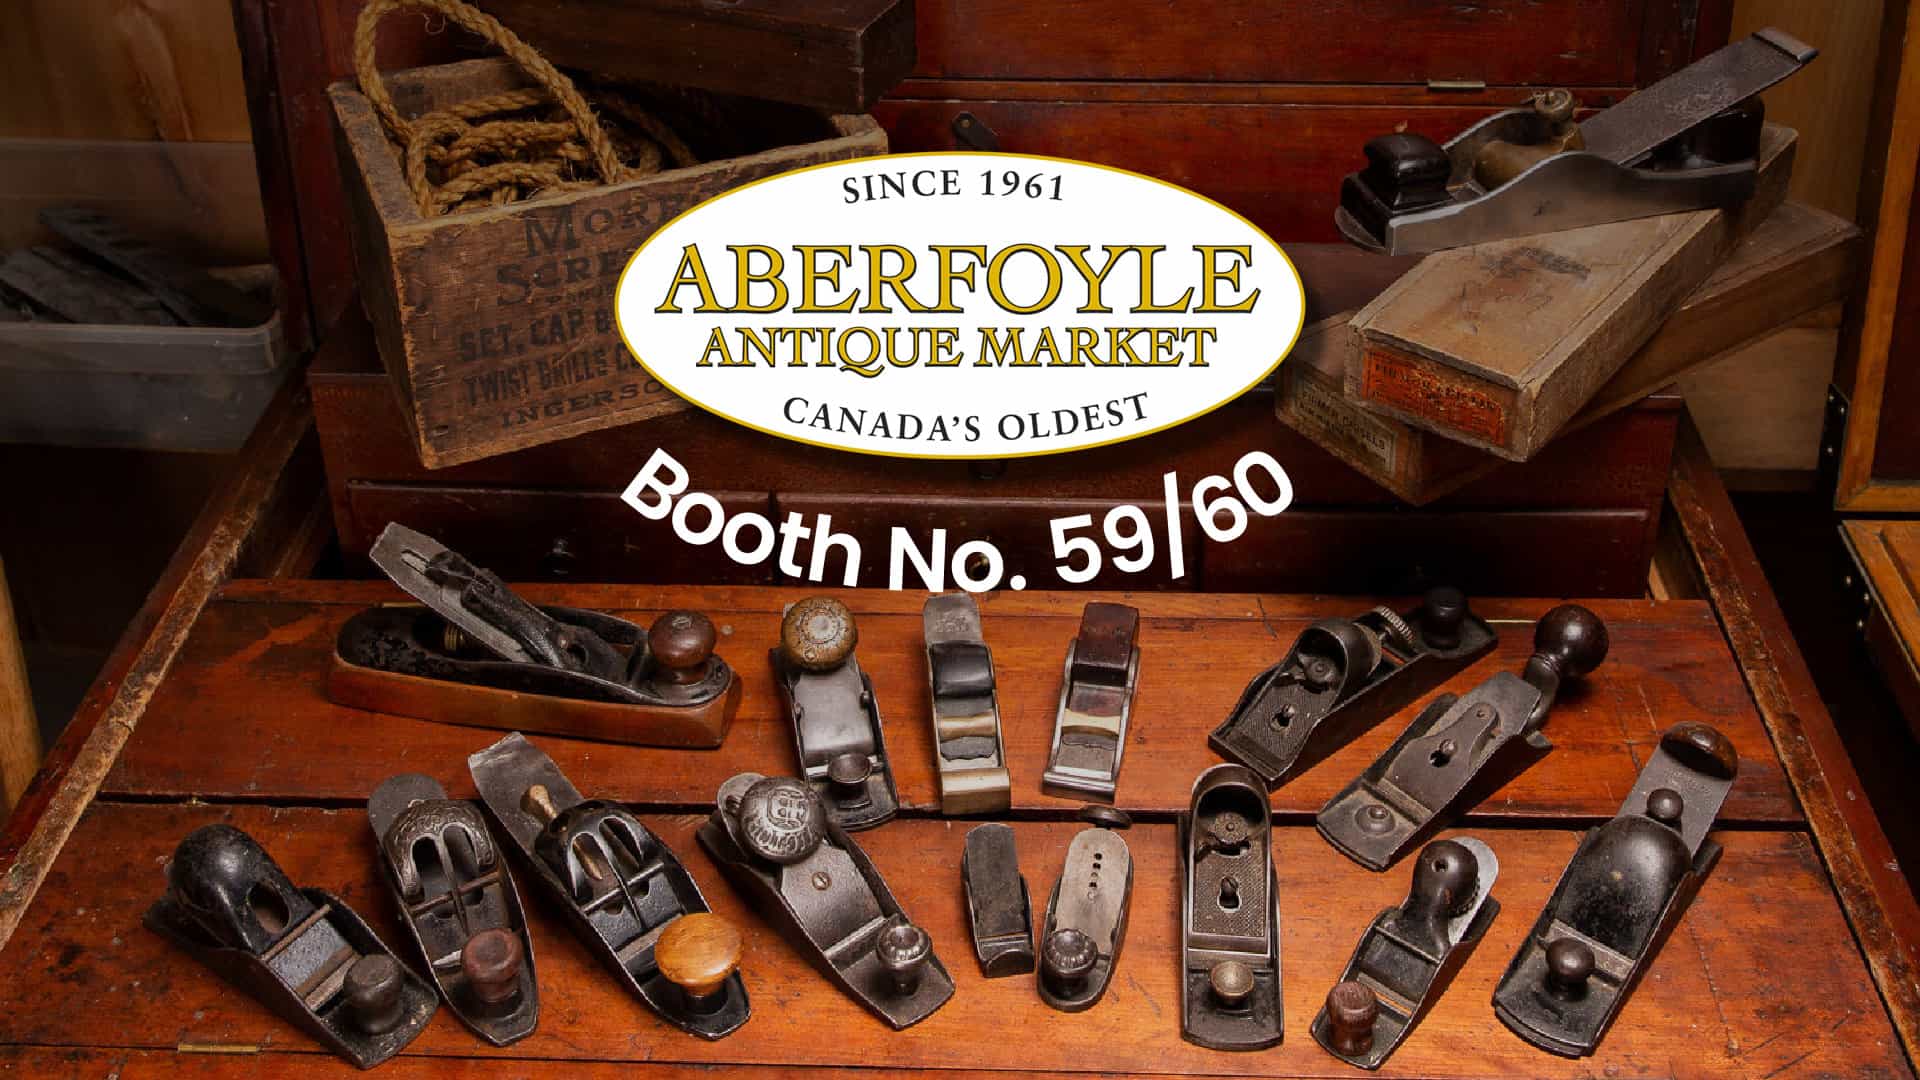 Antique hand planers and the logo of the Aberfoyle Antique Market.